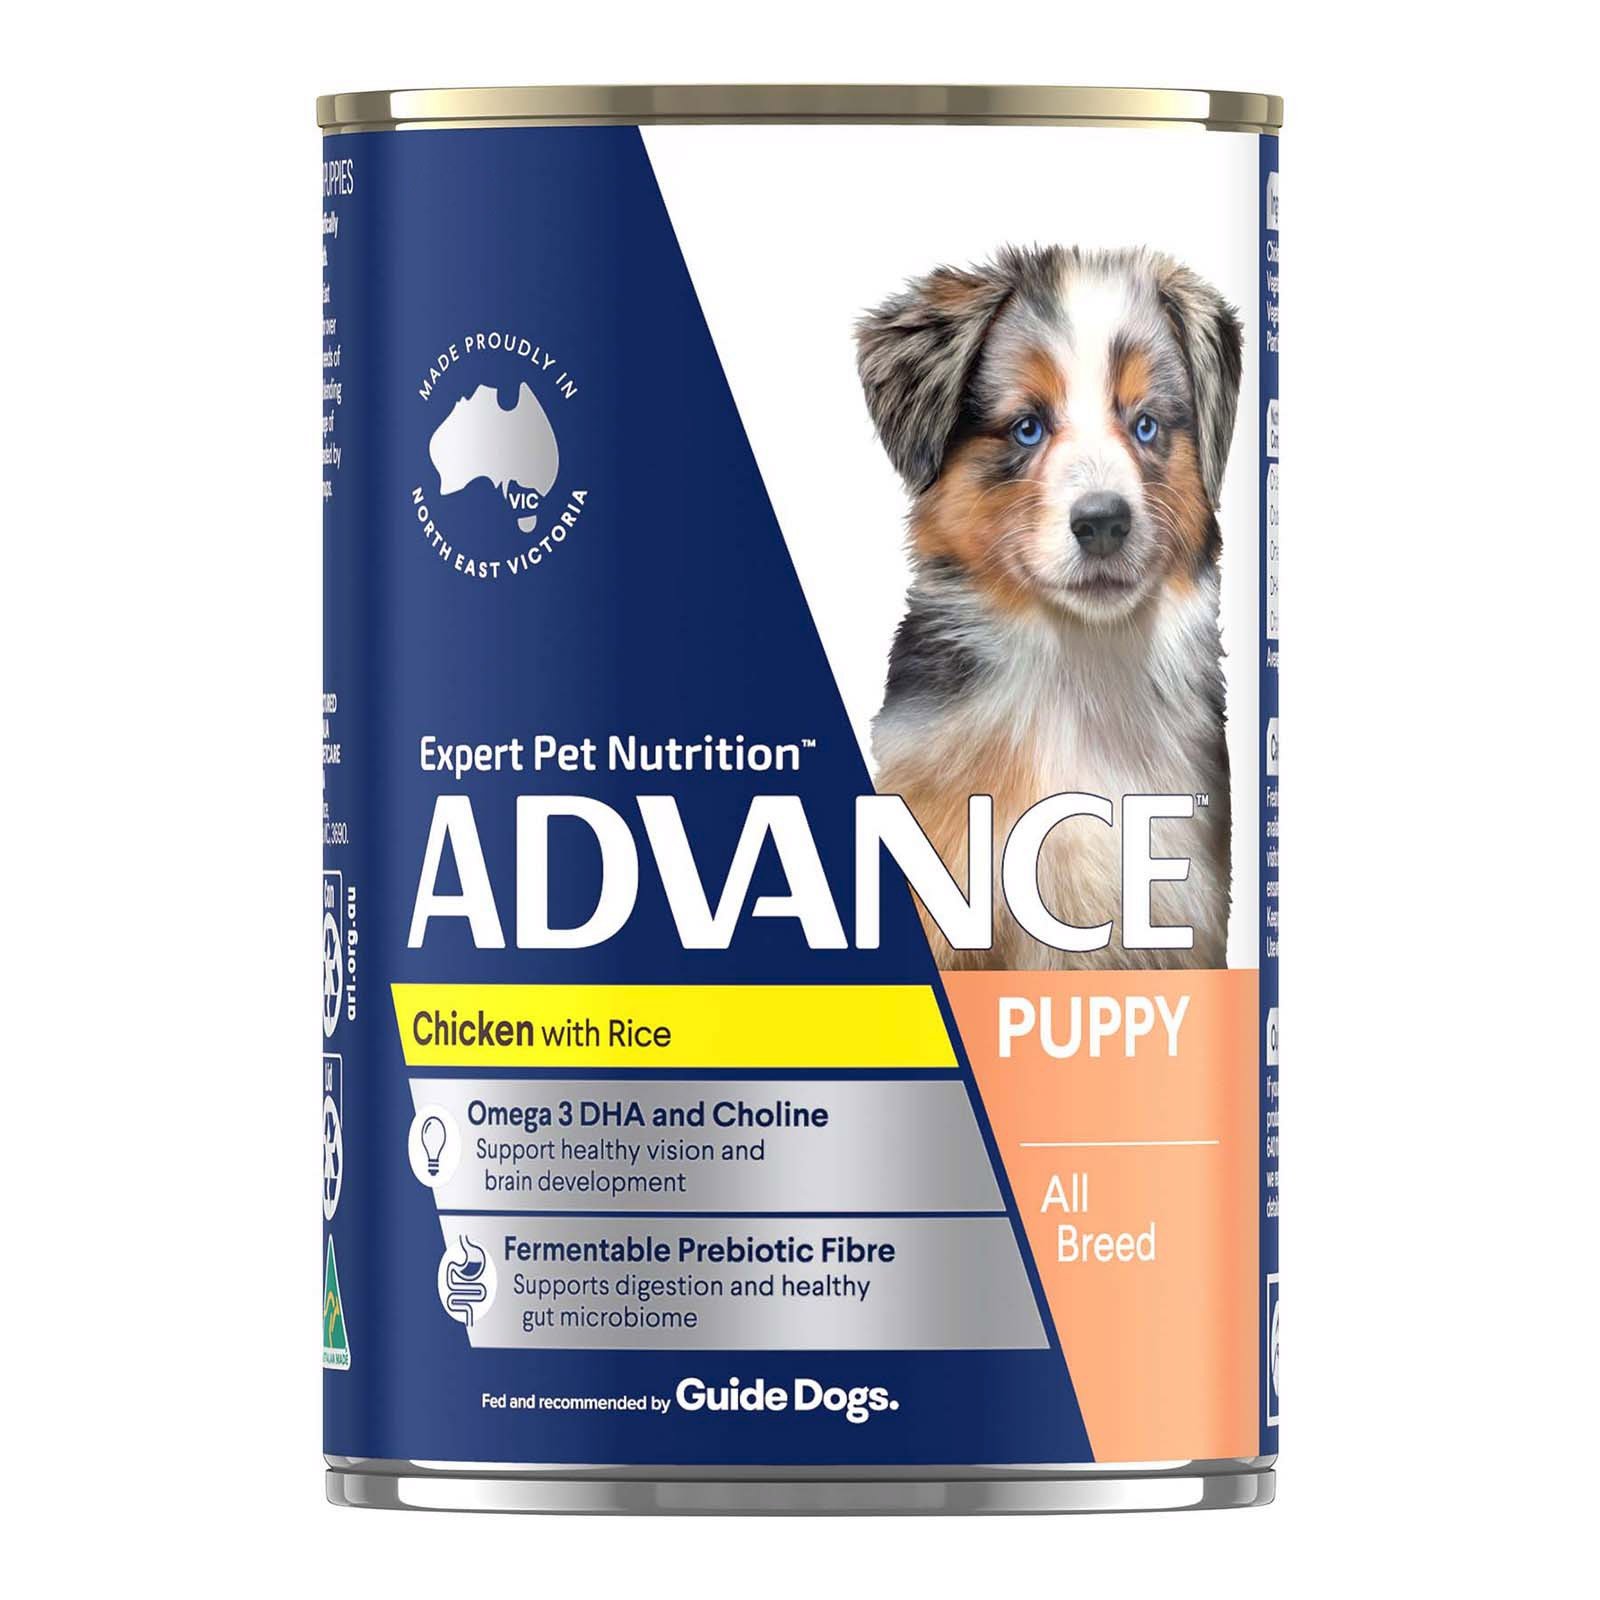 Advance Puppy Plus Growth with Chicken & Rice Cans 700 Gm